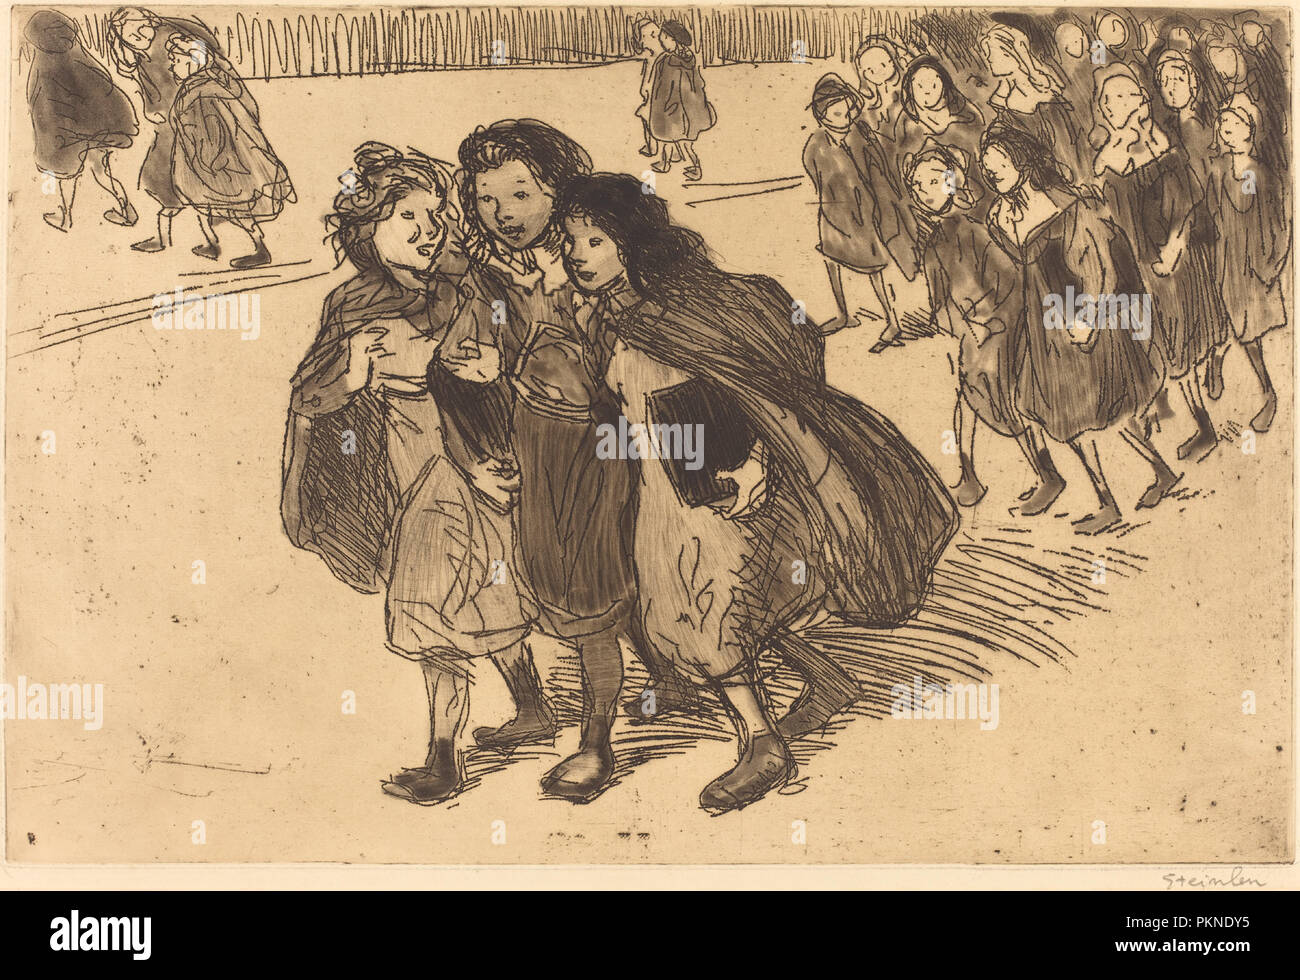 Girls Coming from School (Gamines sortant de l'ecole). Dated: 1911. Medium: etching (copper). Museum: National Gallery of Art, Washington DC. Author: STEINLEN, TEOPHILE. Stock Photo